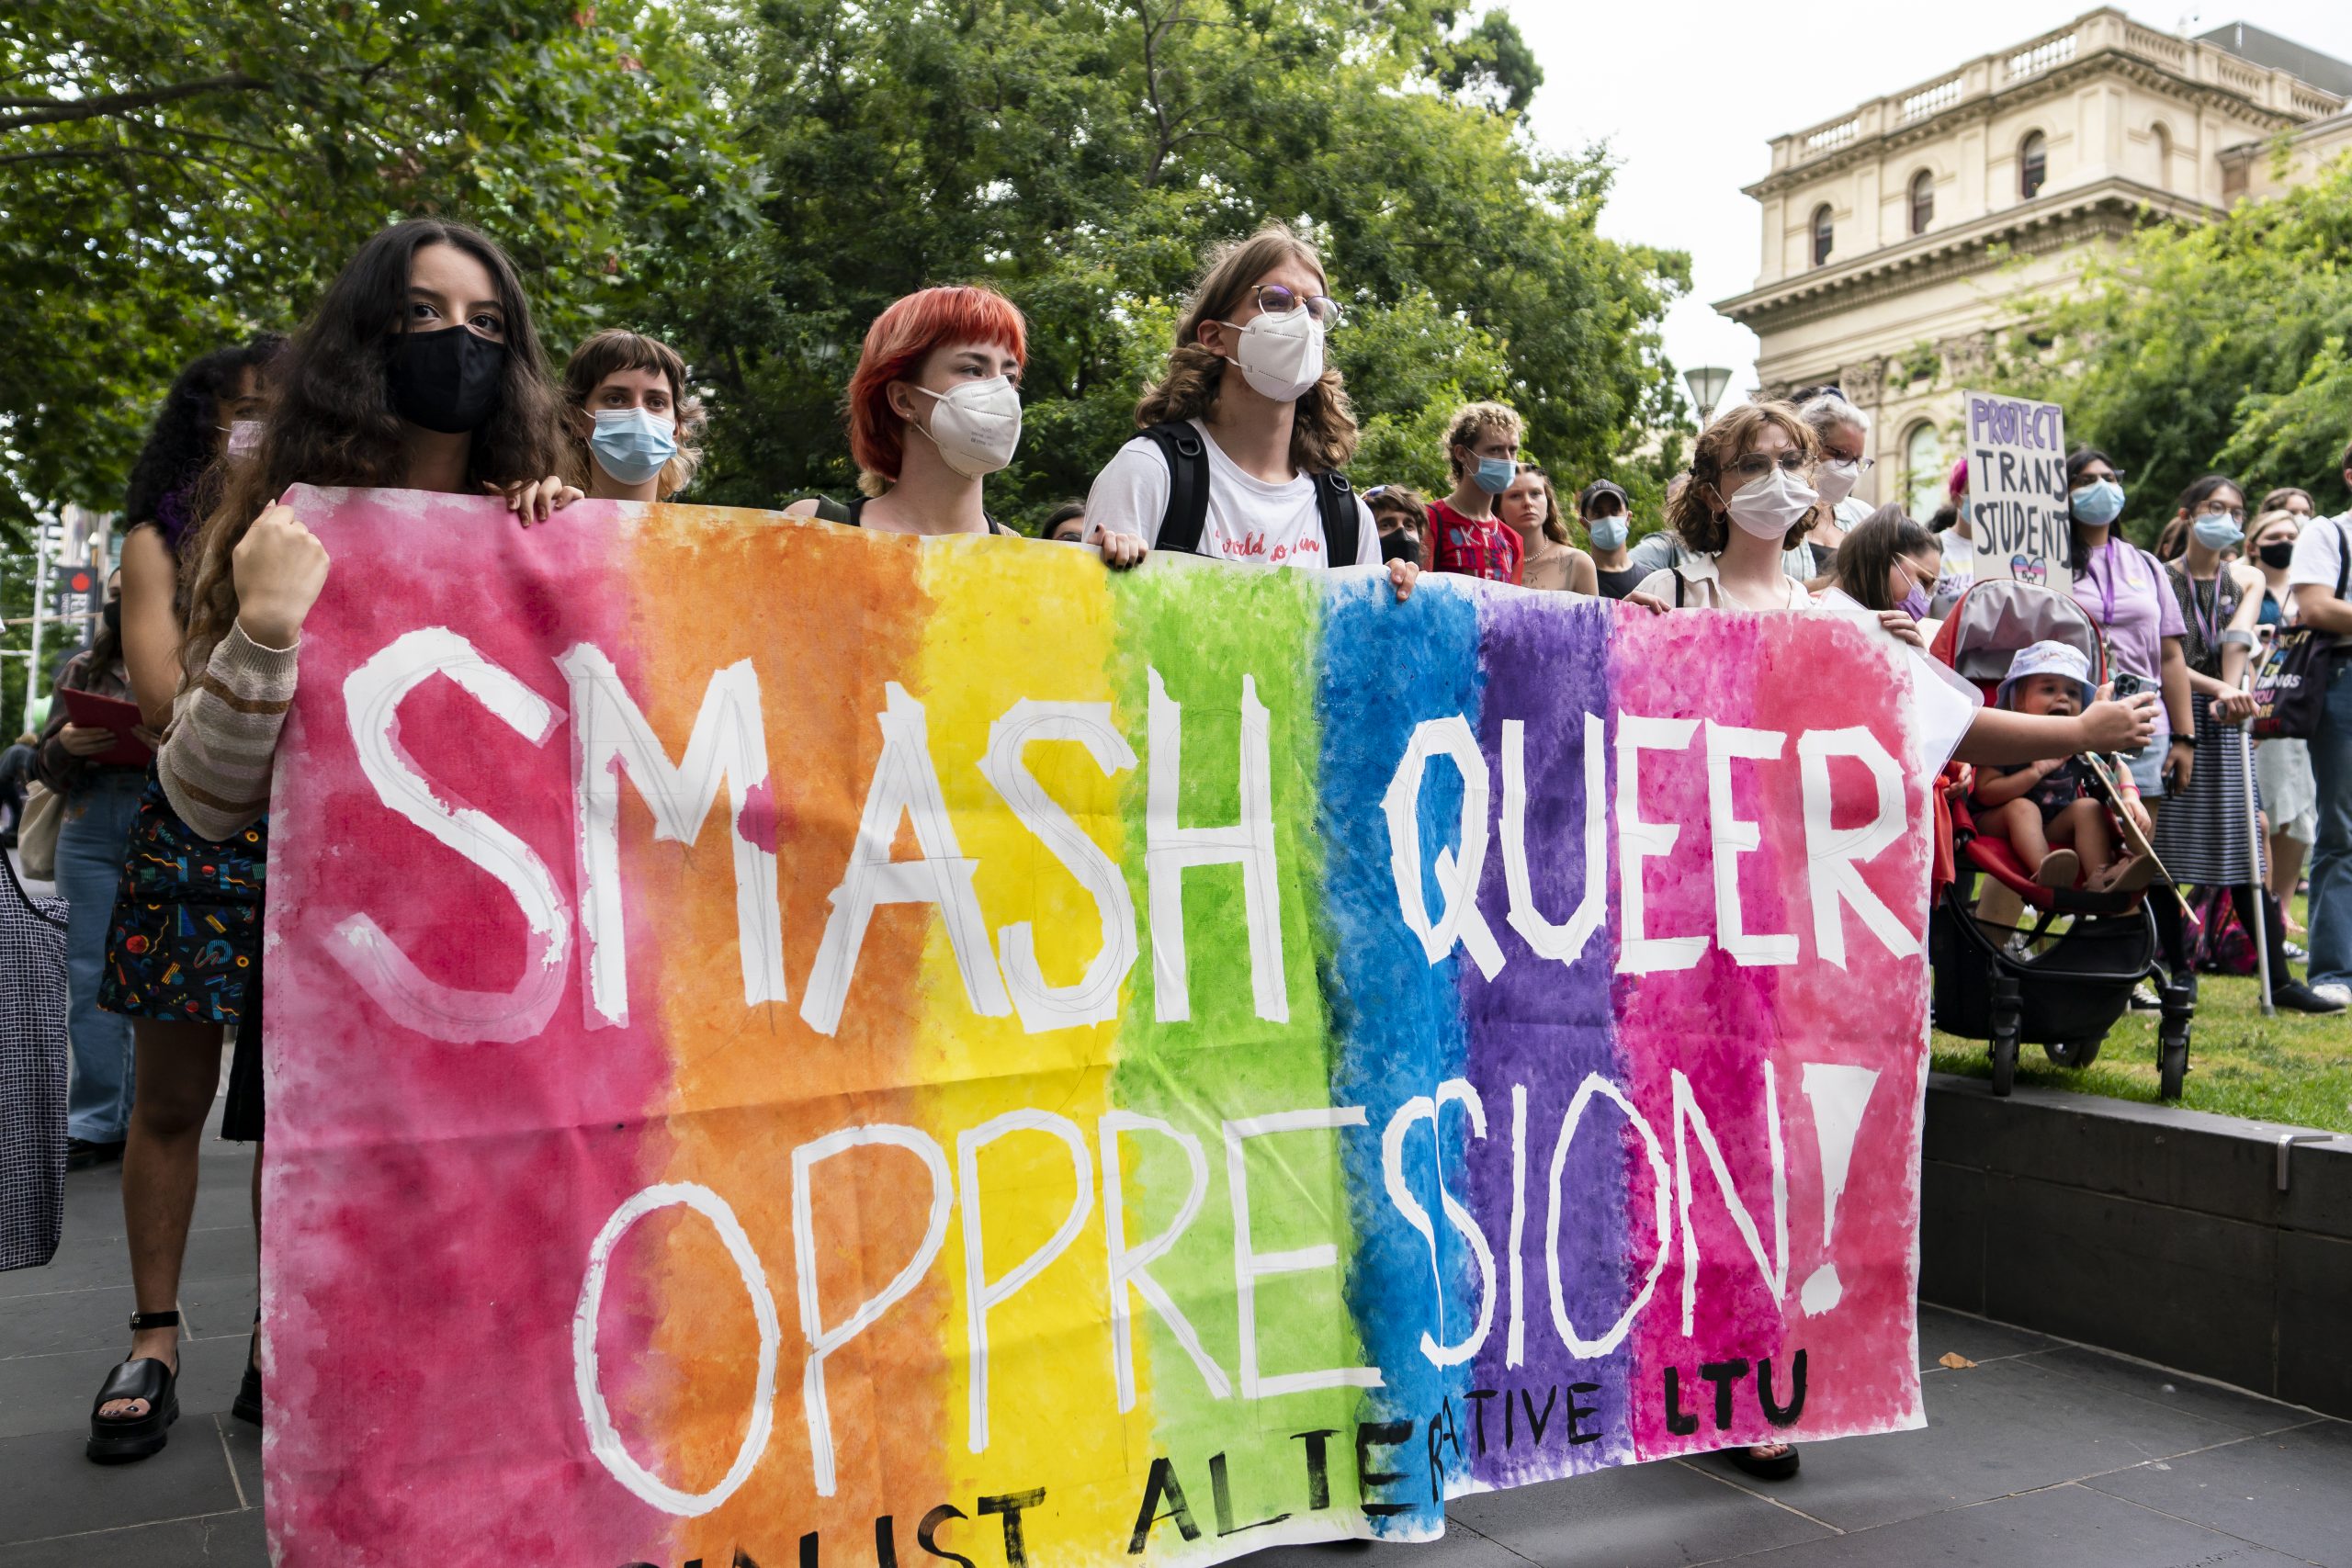 A banner reads:"Smash Queer Oppression"